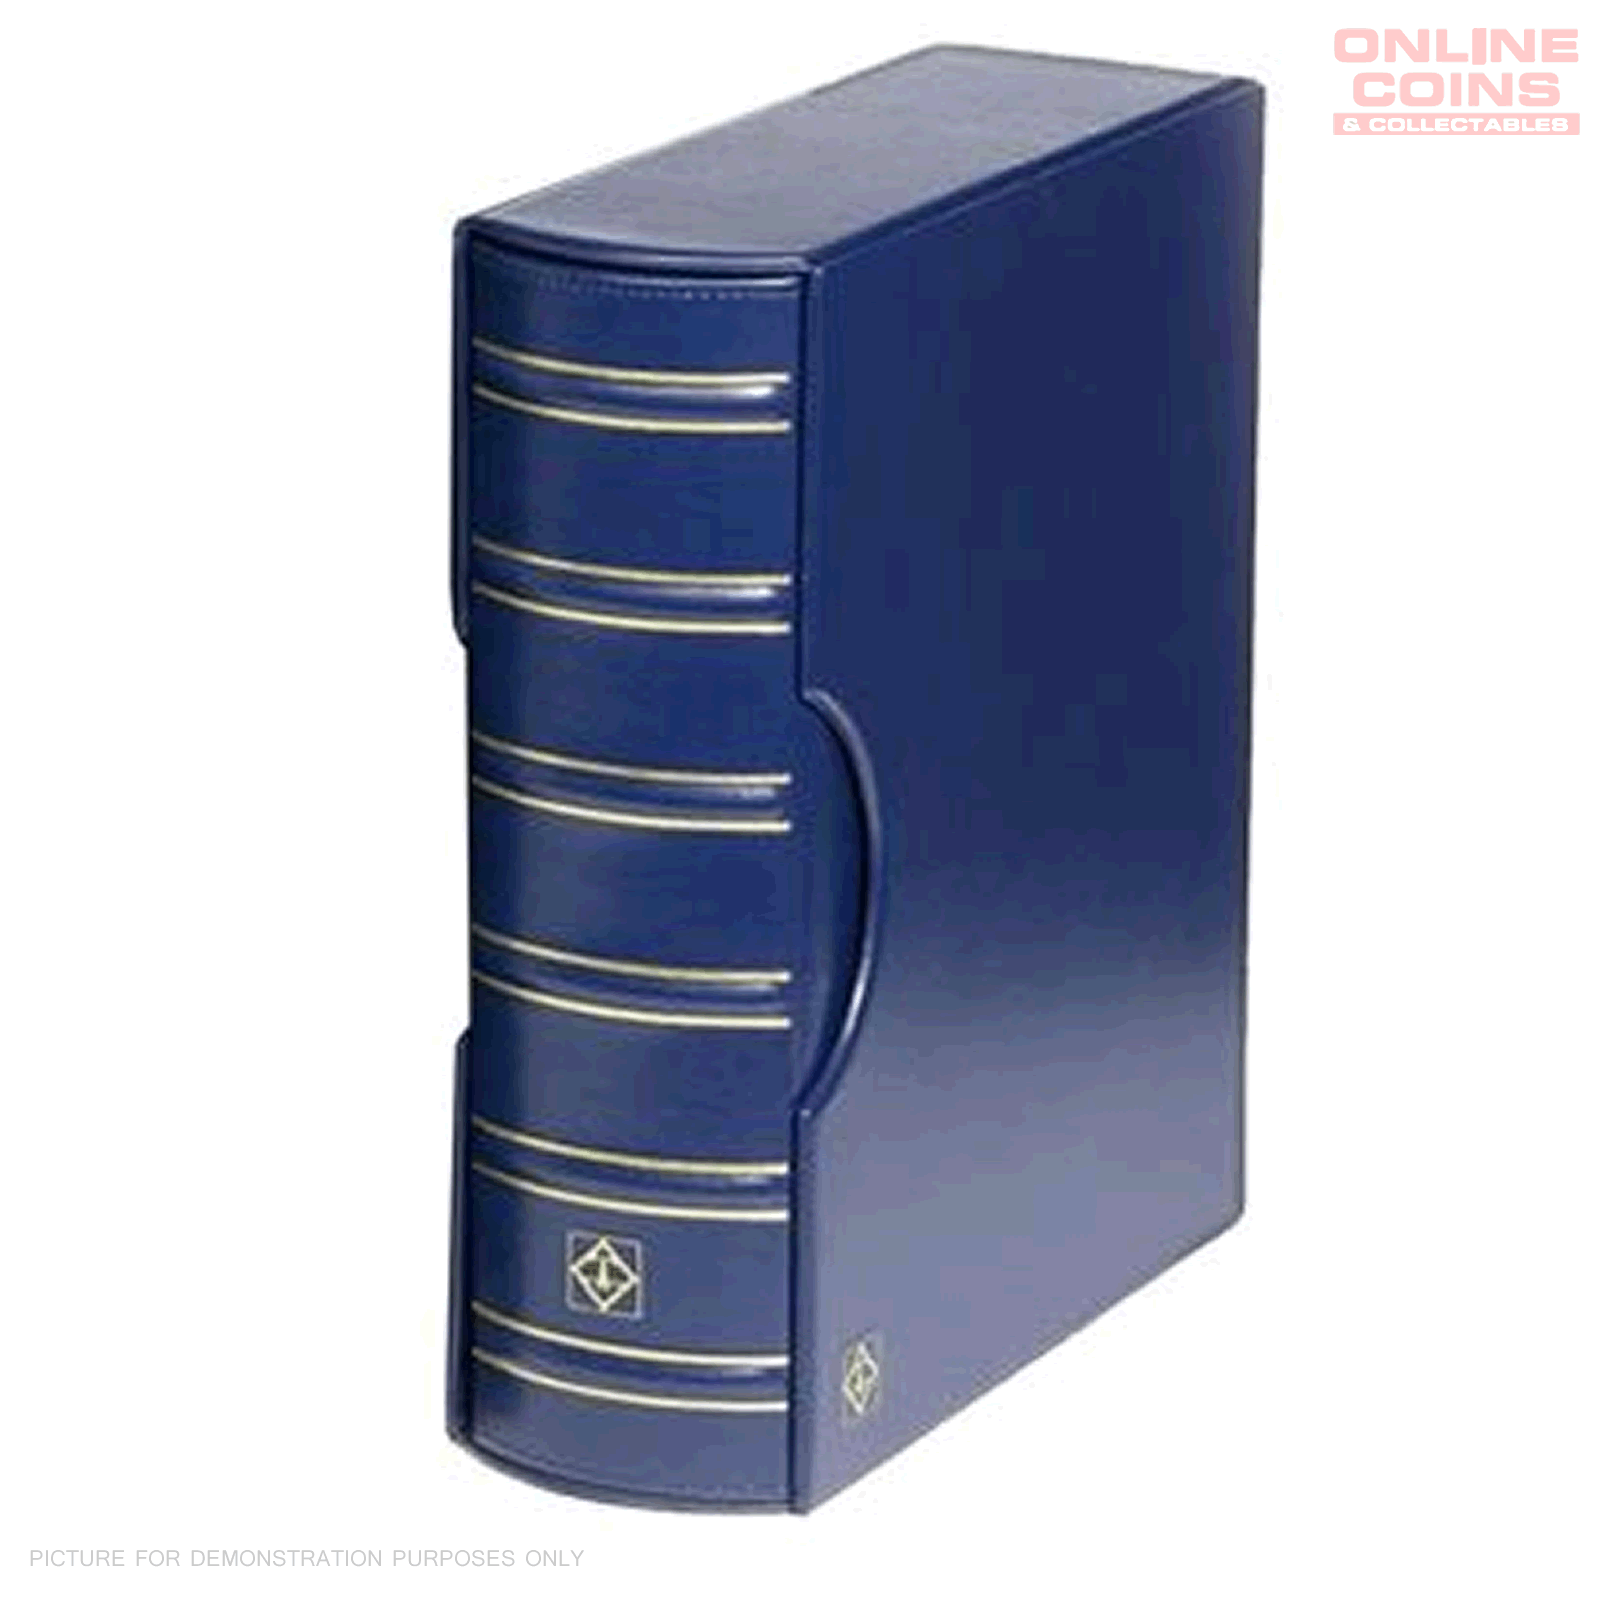 Lighthouse Classic Vario Gigant Album and Slipcase For Banknotes and Stamps - Blue